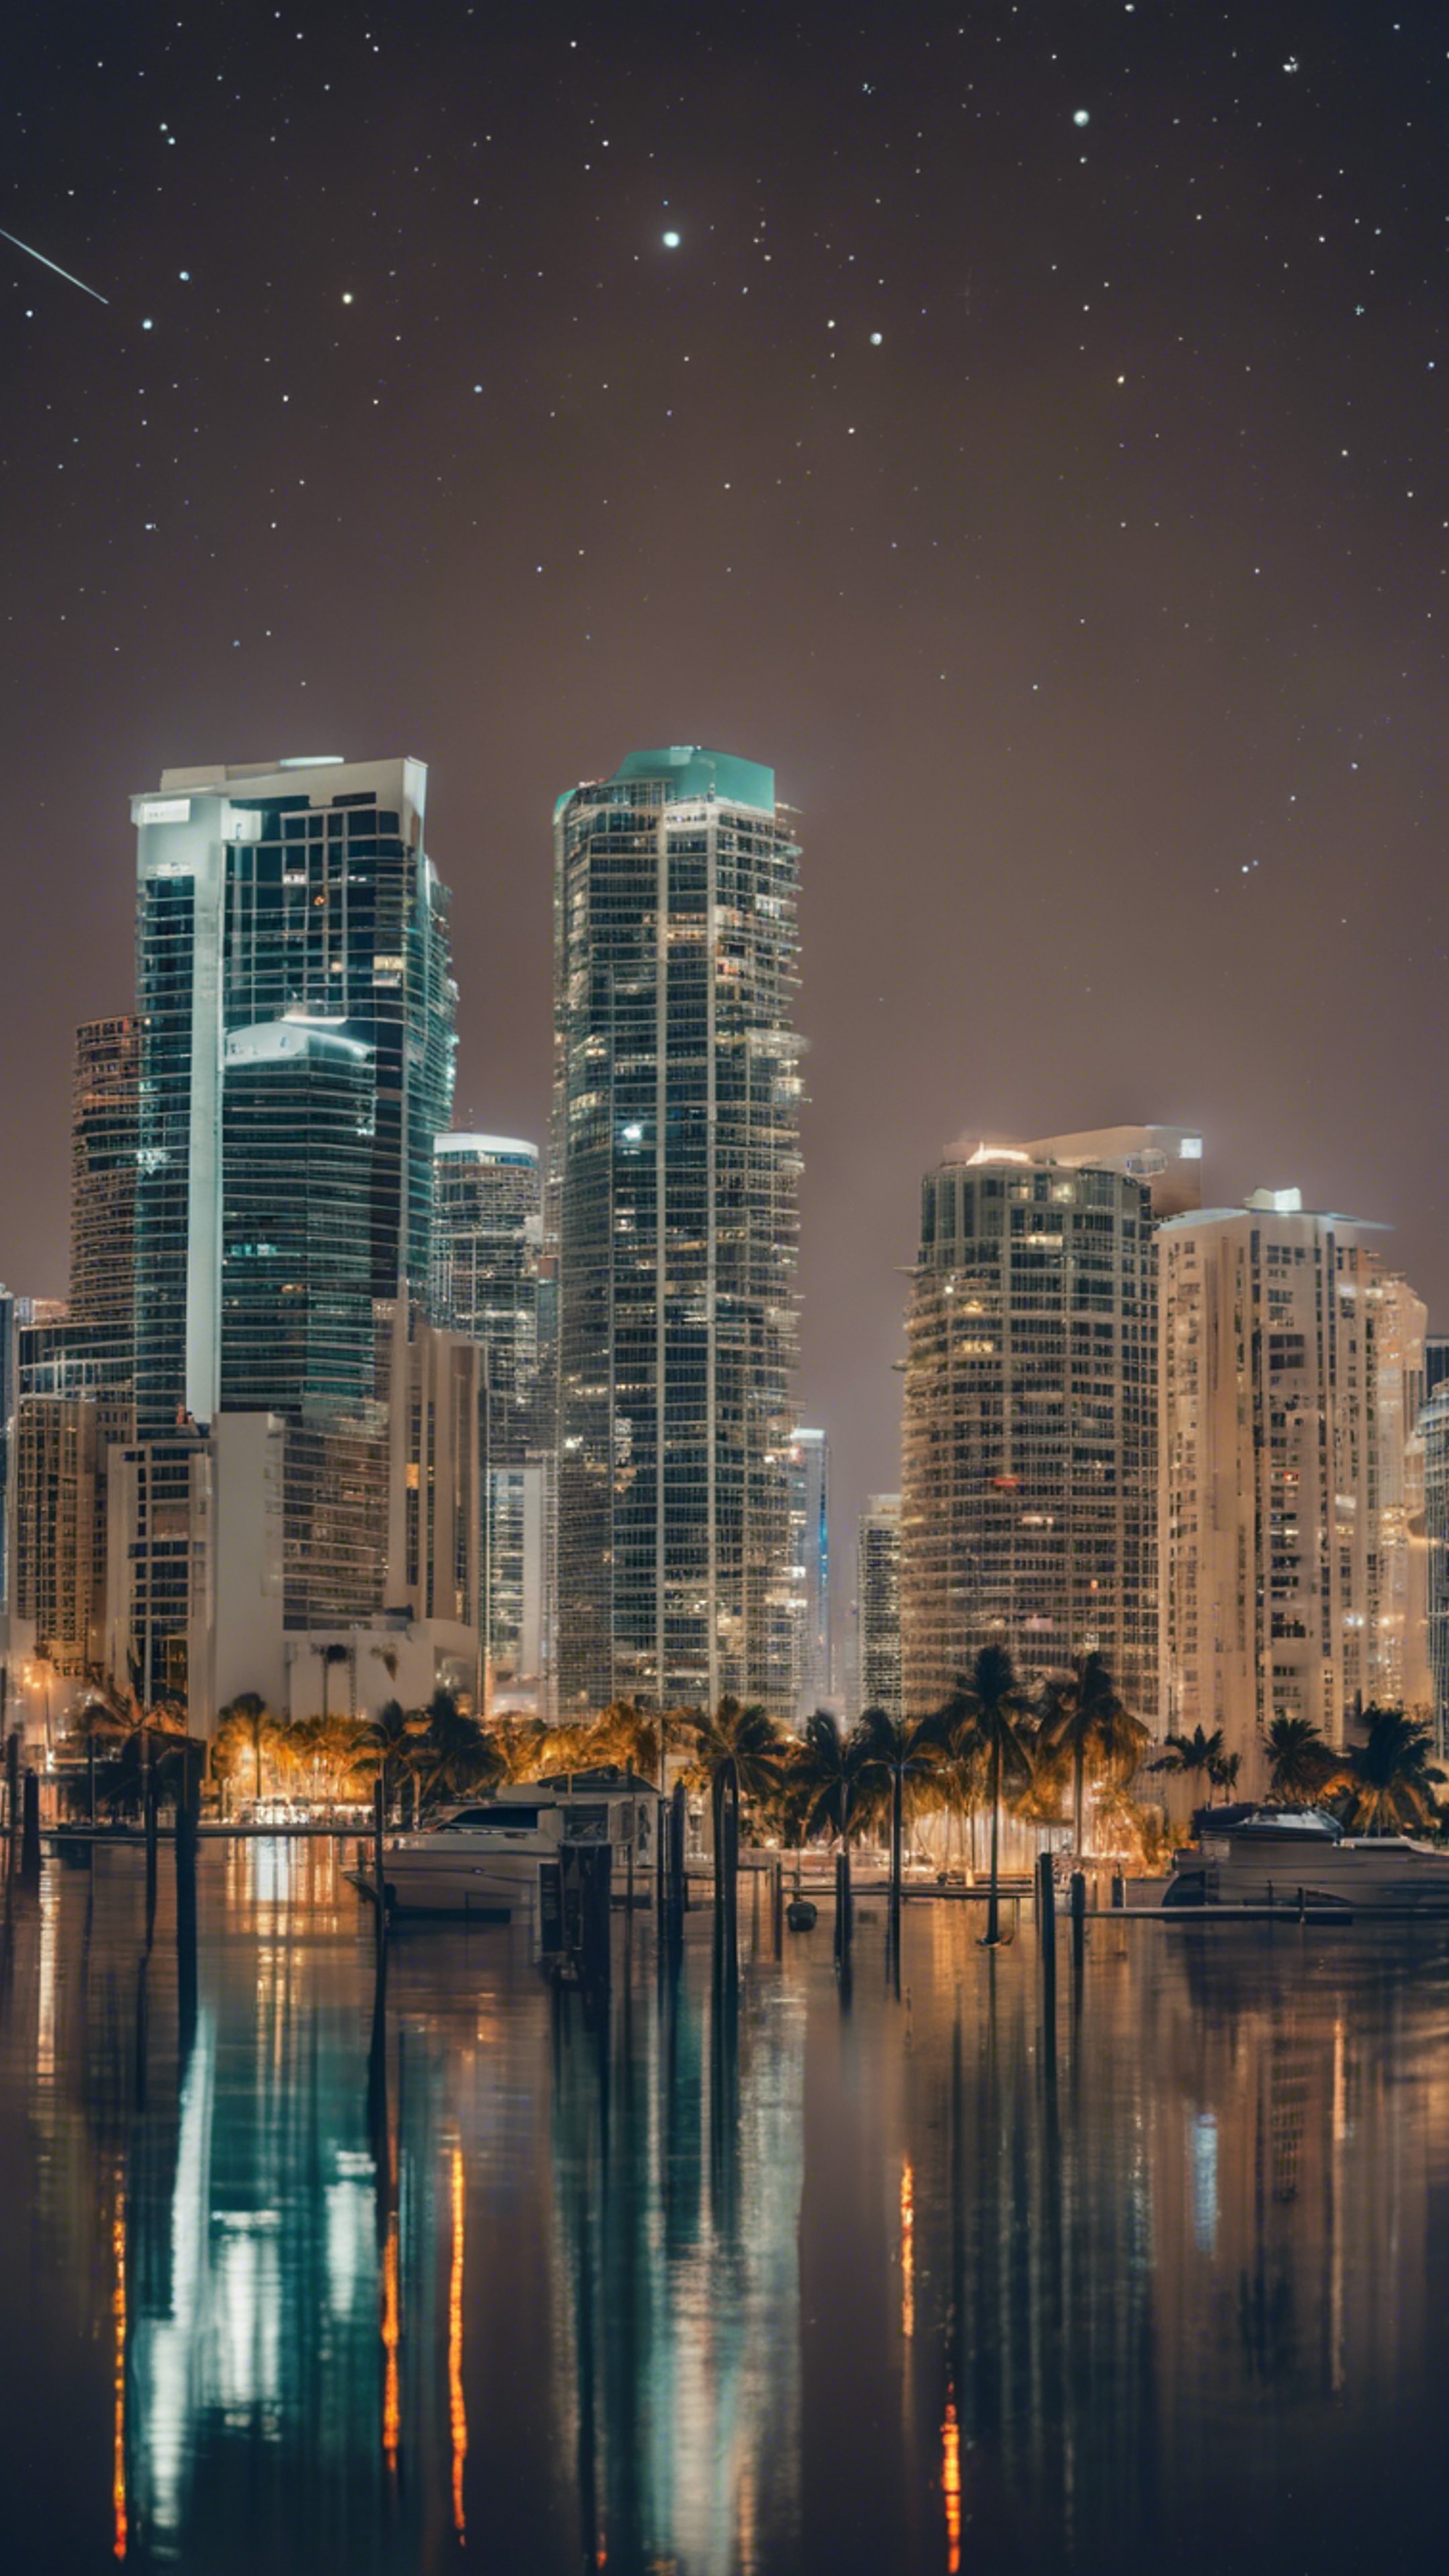 A night view of Miami’s skyline, reflected in the calm waters of Biscayne Bay, under a starry sky.壁紙[6a2ec2761bce4e748034]